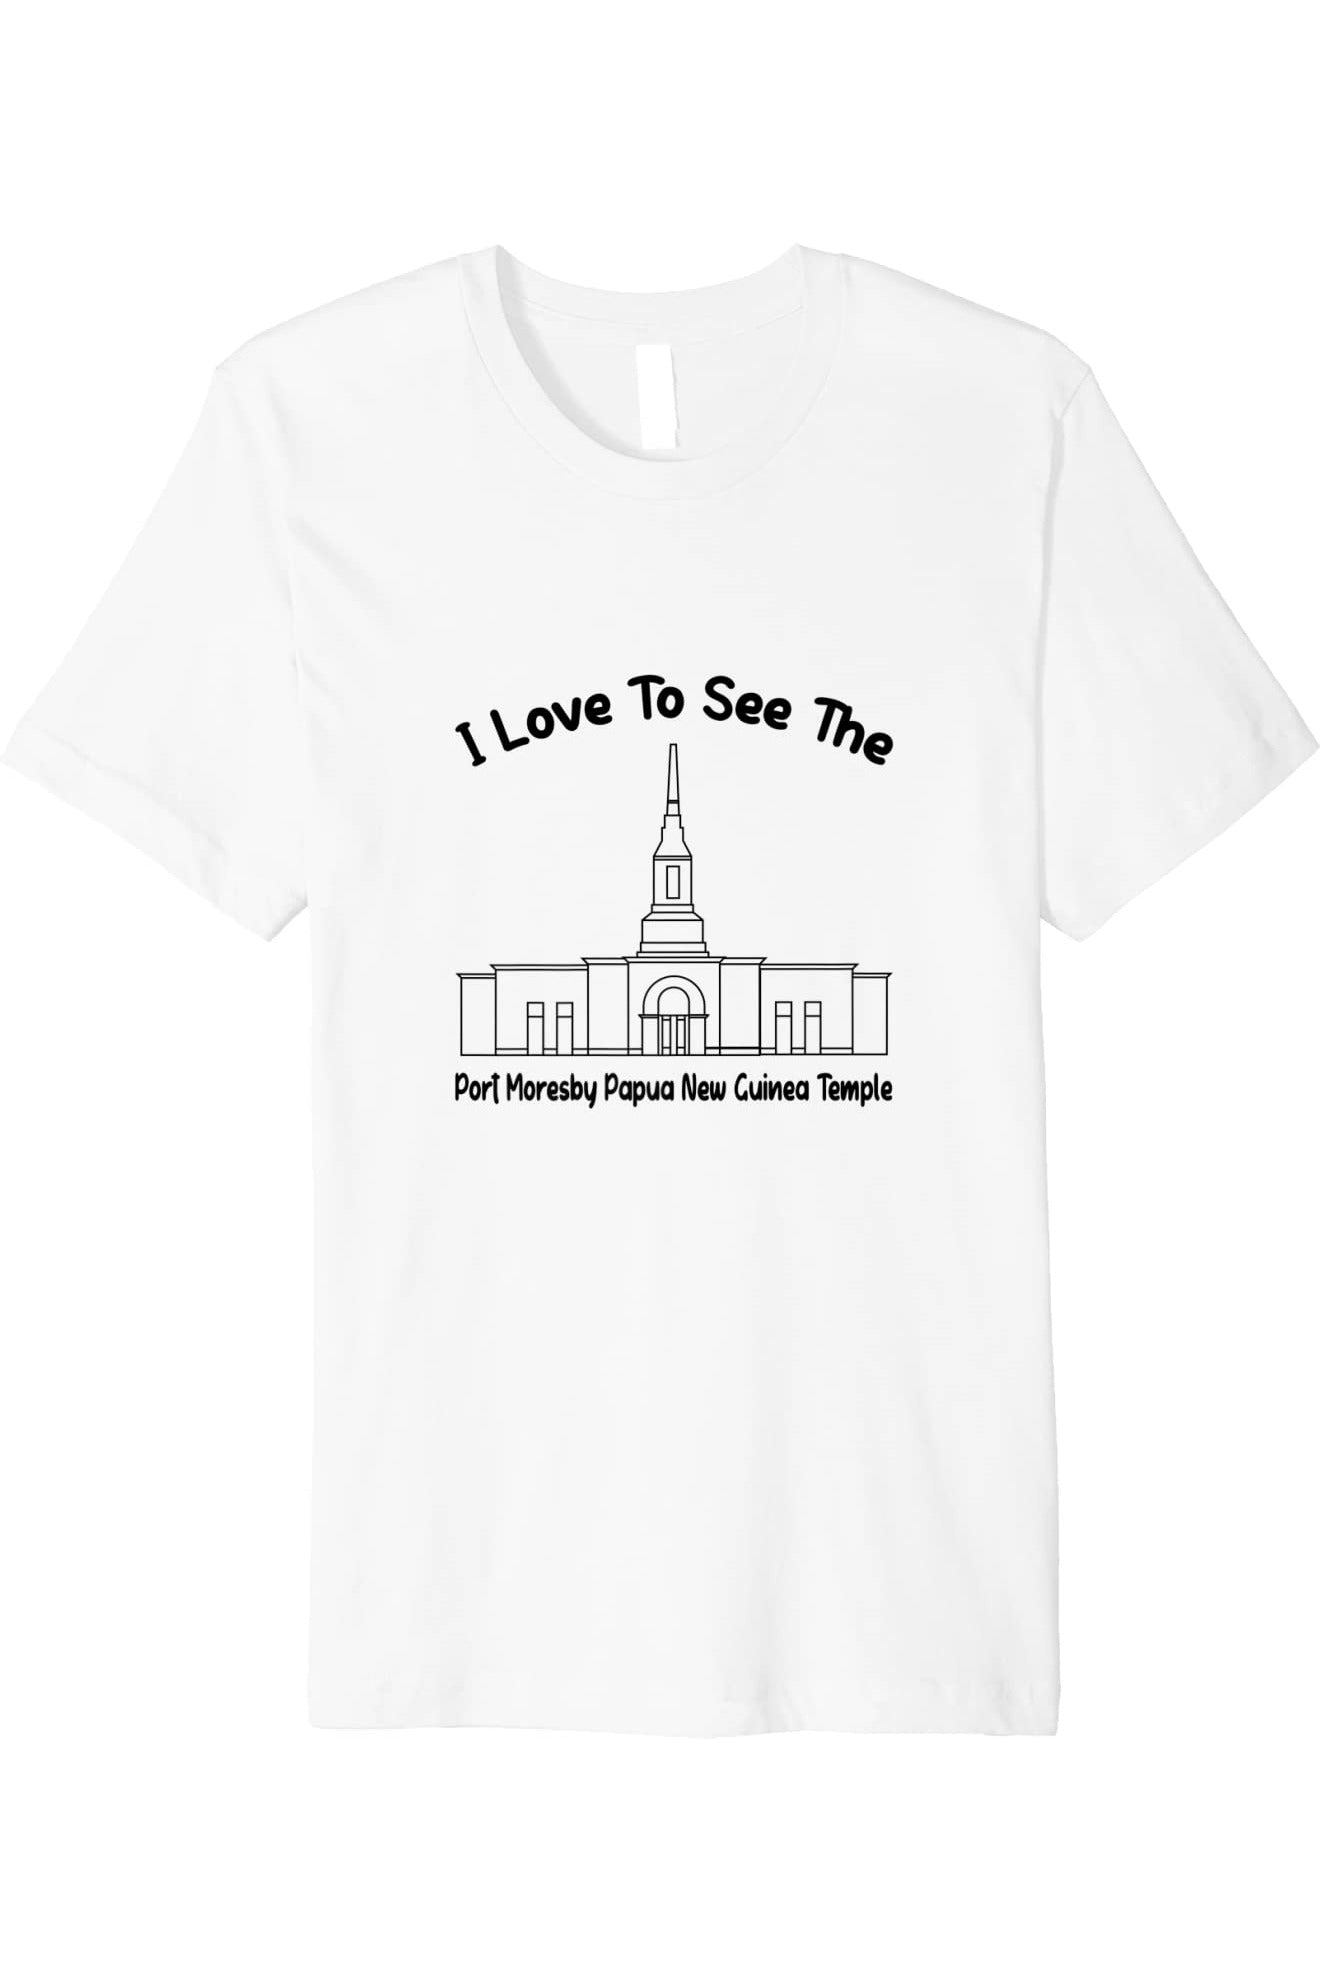 Port Moresby Papua New Guinea Temple T-Shirt - Premium - Primary Style (English) US